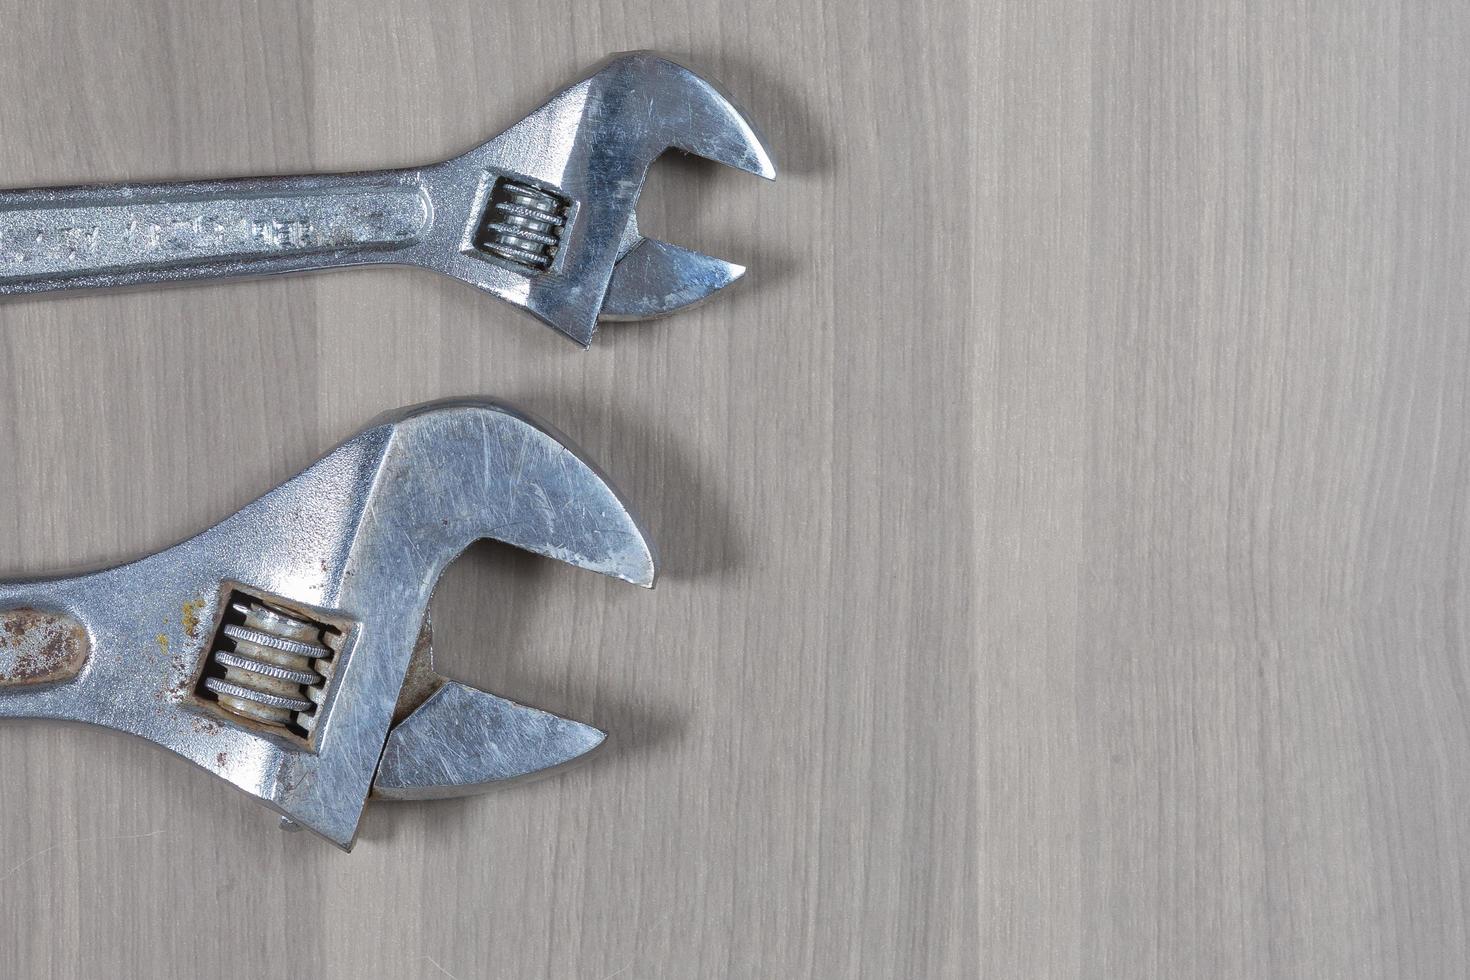 Different tools on a wooden background. Adjustable wrench photo